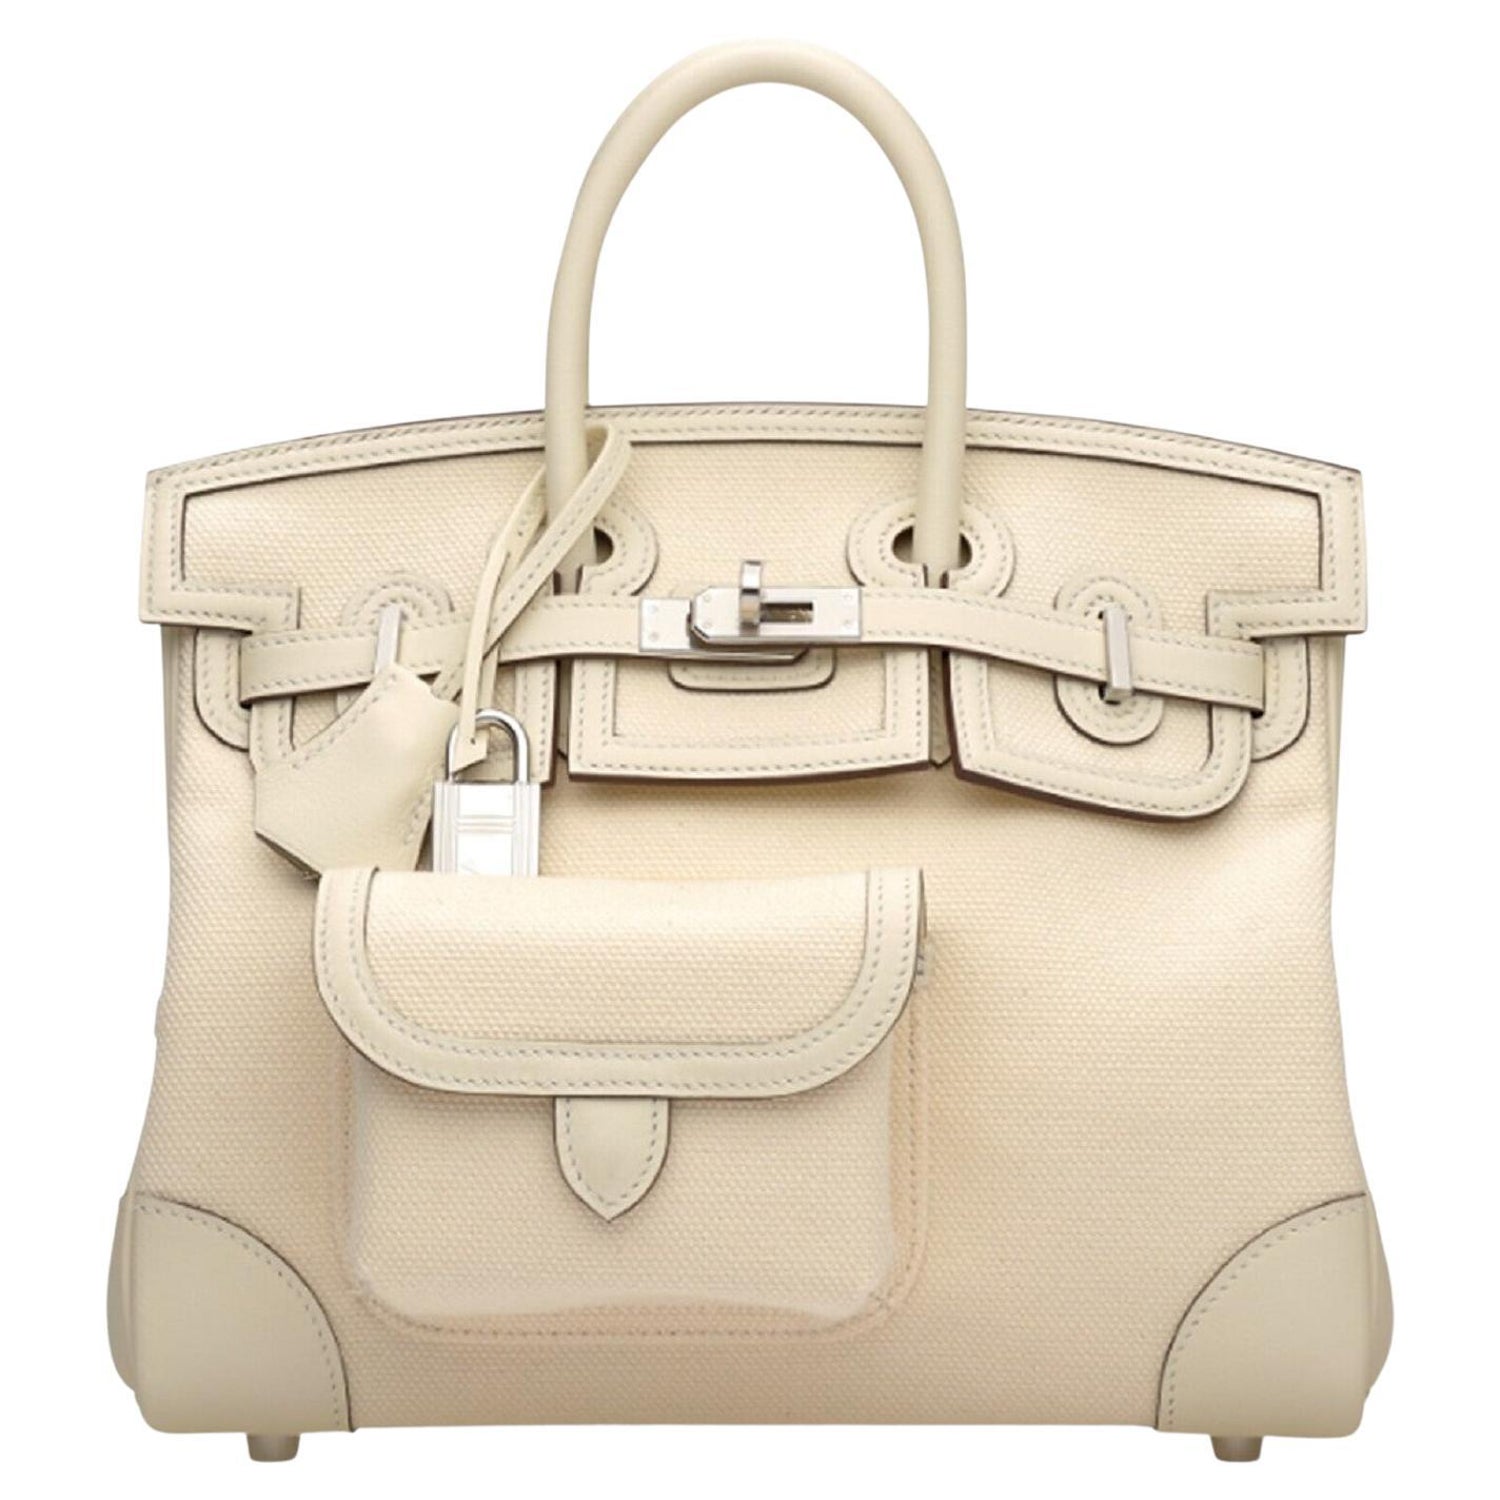 The Worlds Most Exclusive Bag / The Birth of the Birkin – Sellier